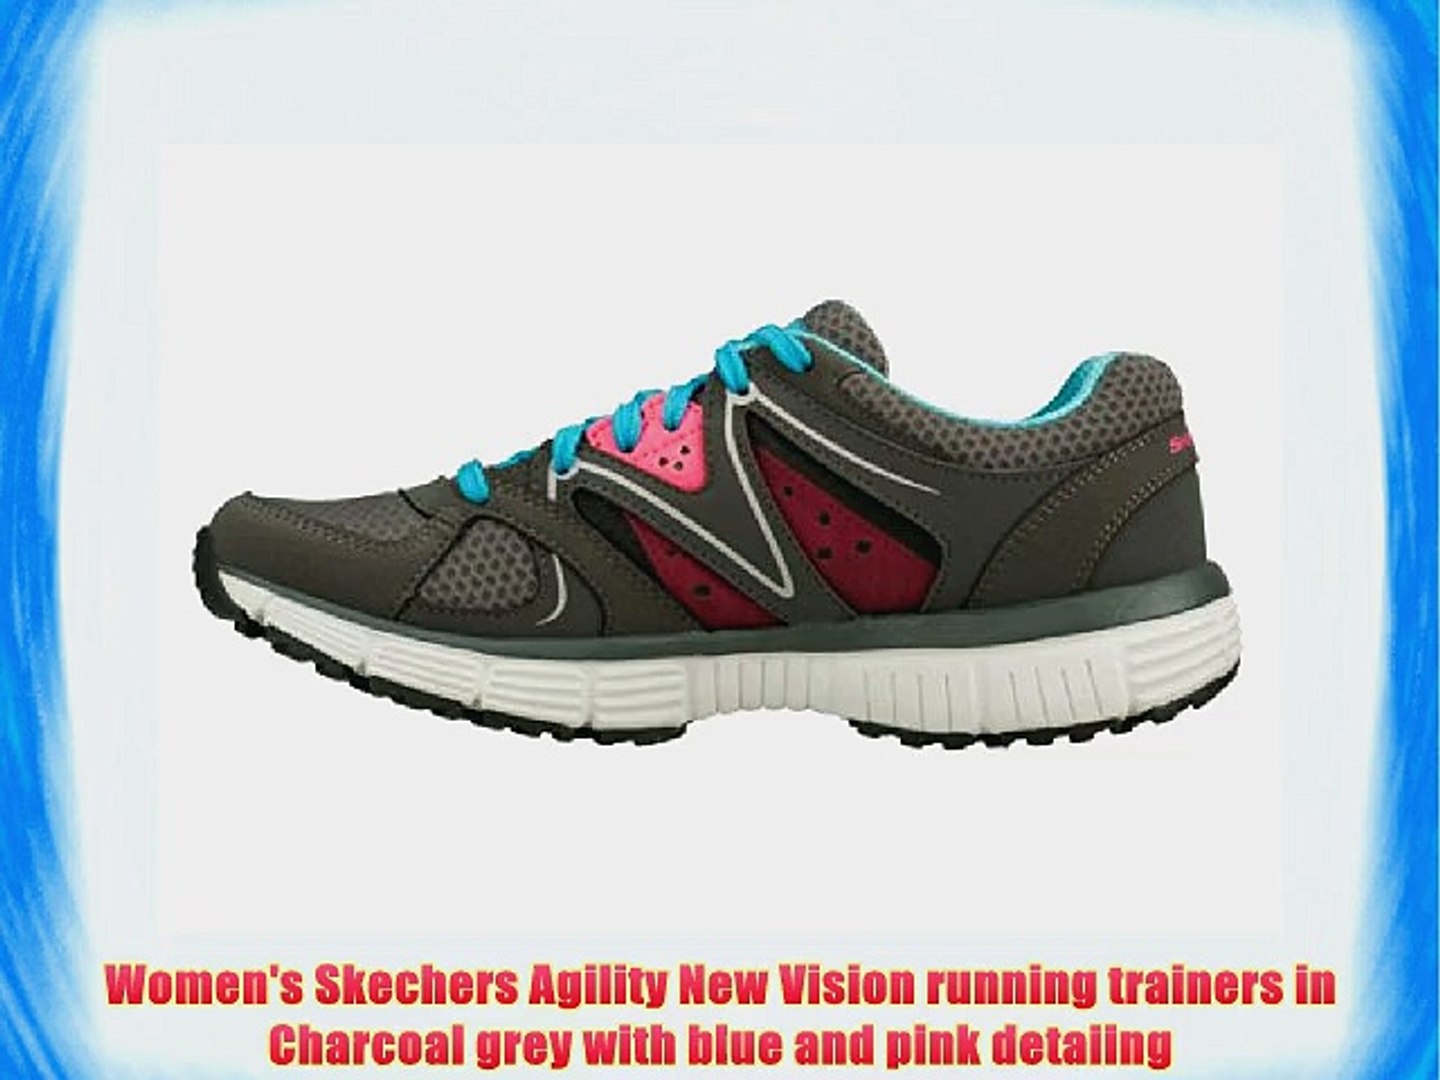 skechers agility new vision